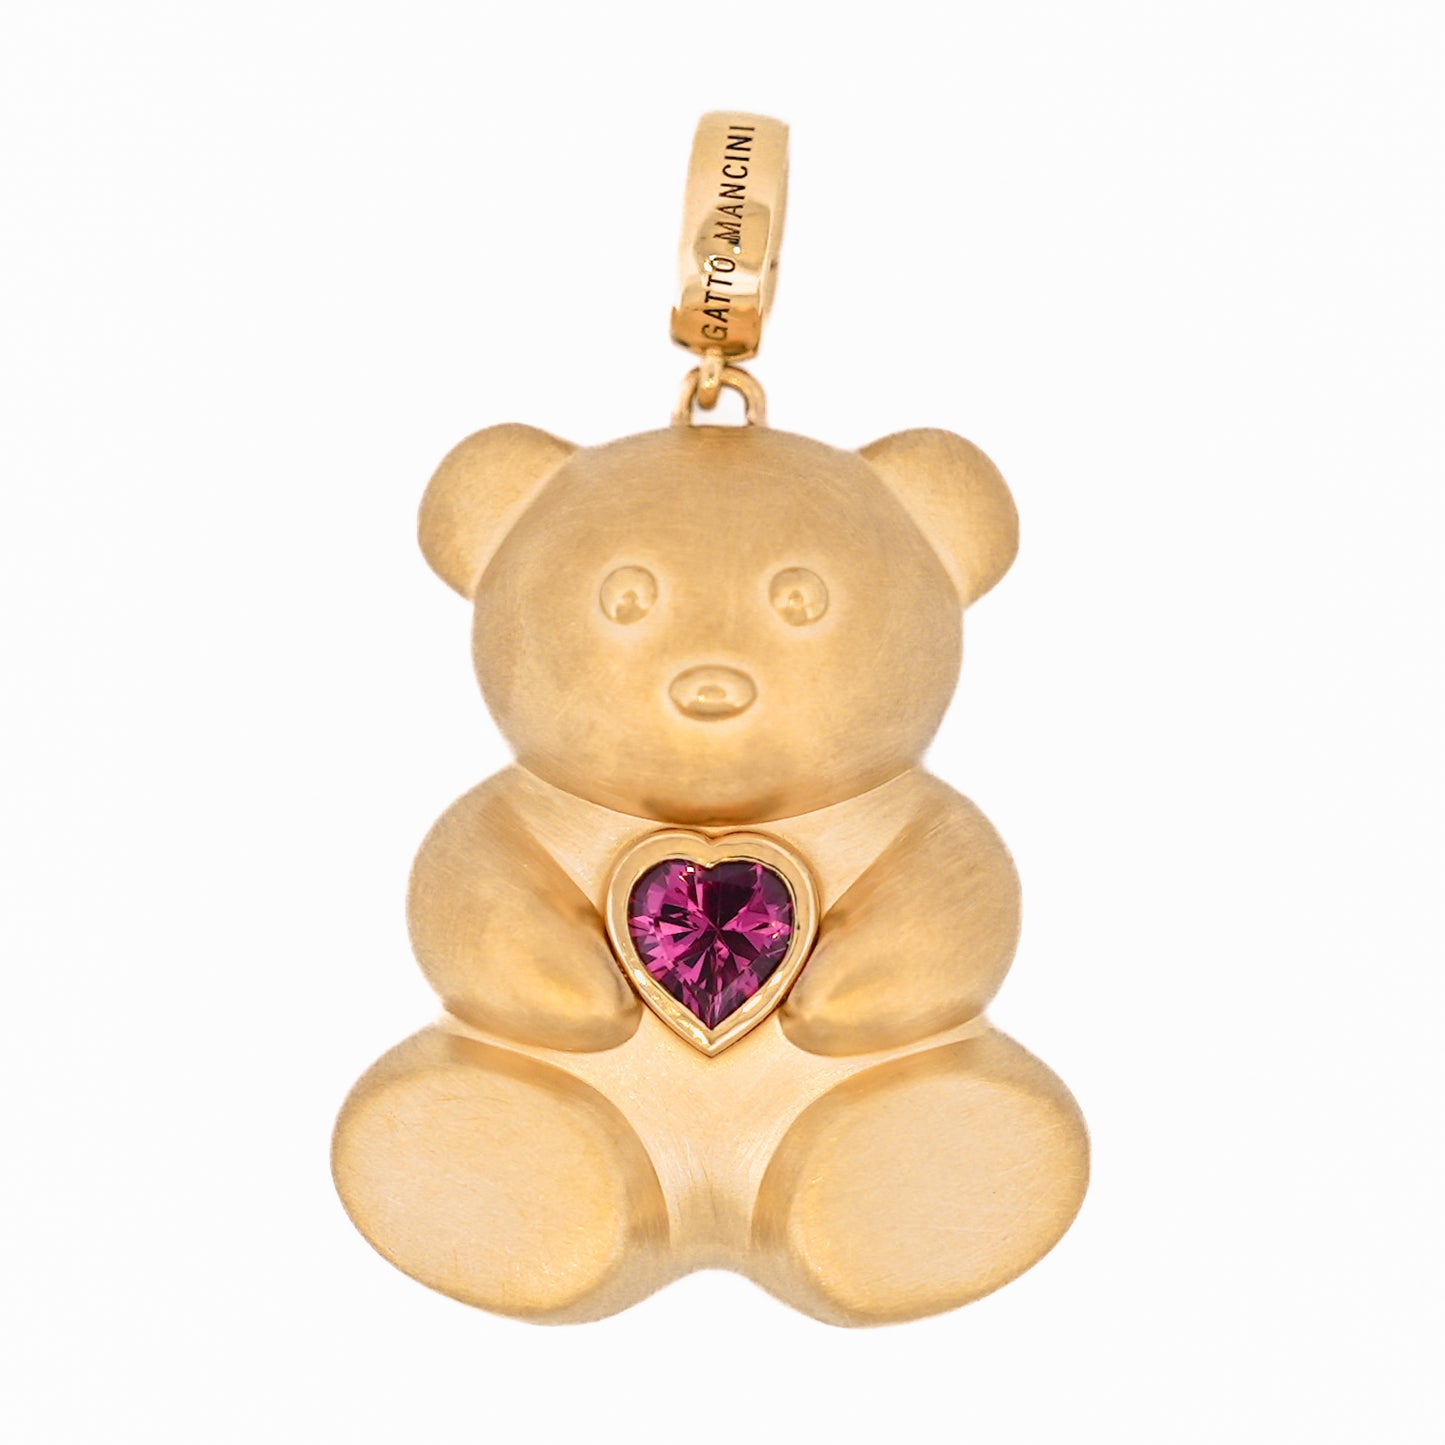 A luxurious Winsome Bear Pendant by Gatto Mancini in 18k yellow gold adorned with a pink gemstone.